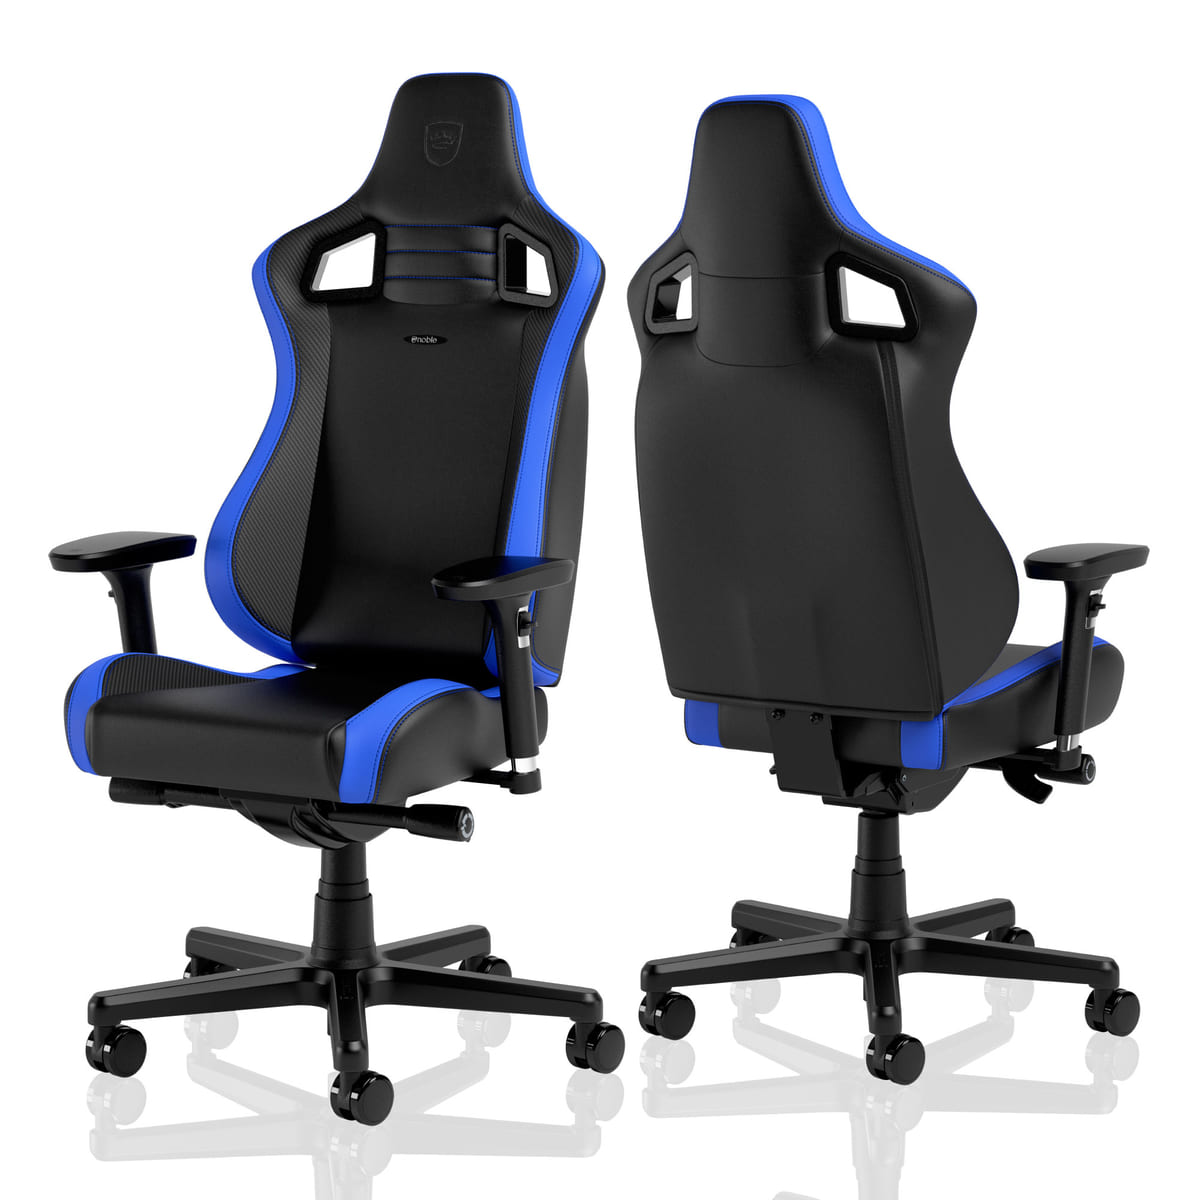 noblechairs(ノーブルチェアーズ)「EPIC COMPACT」４